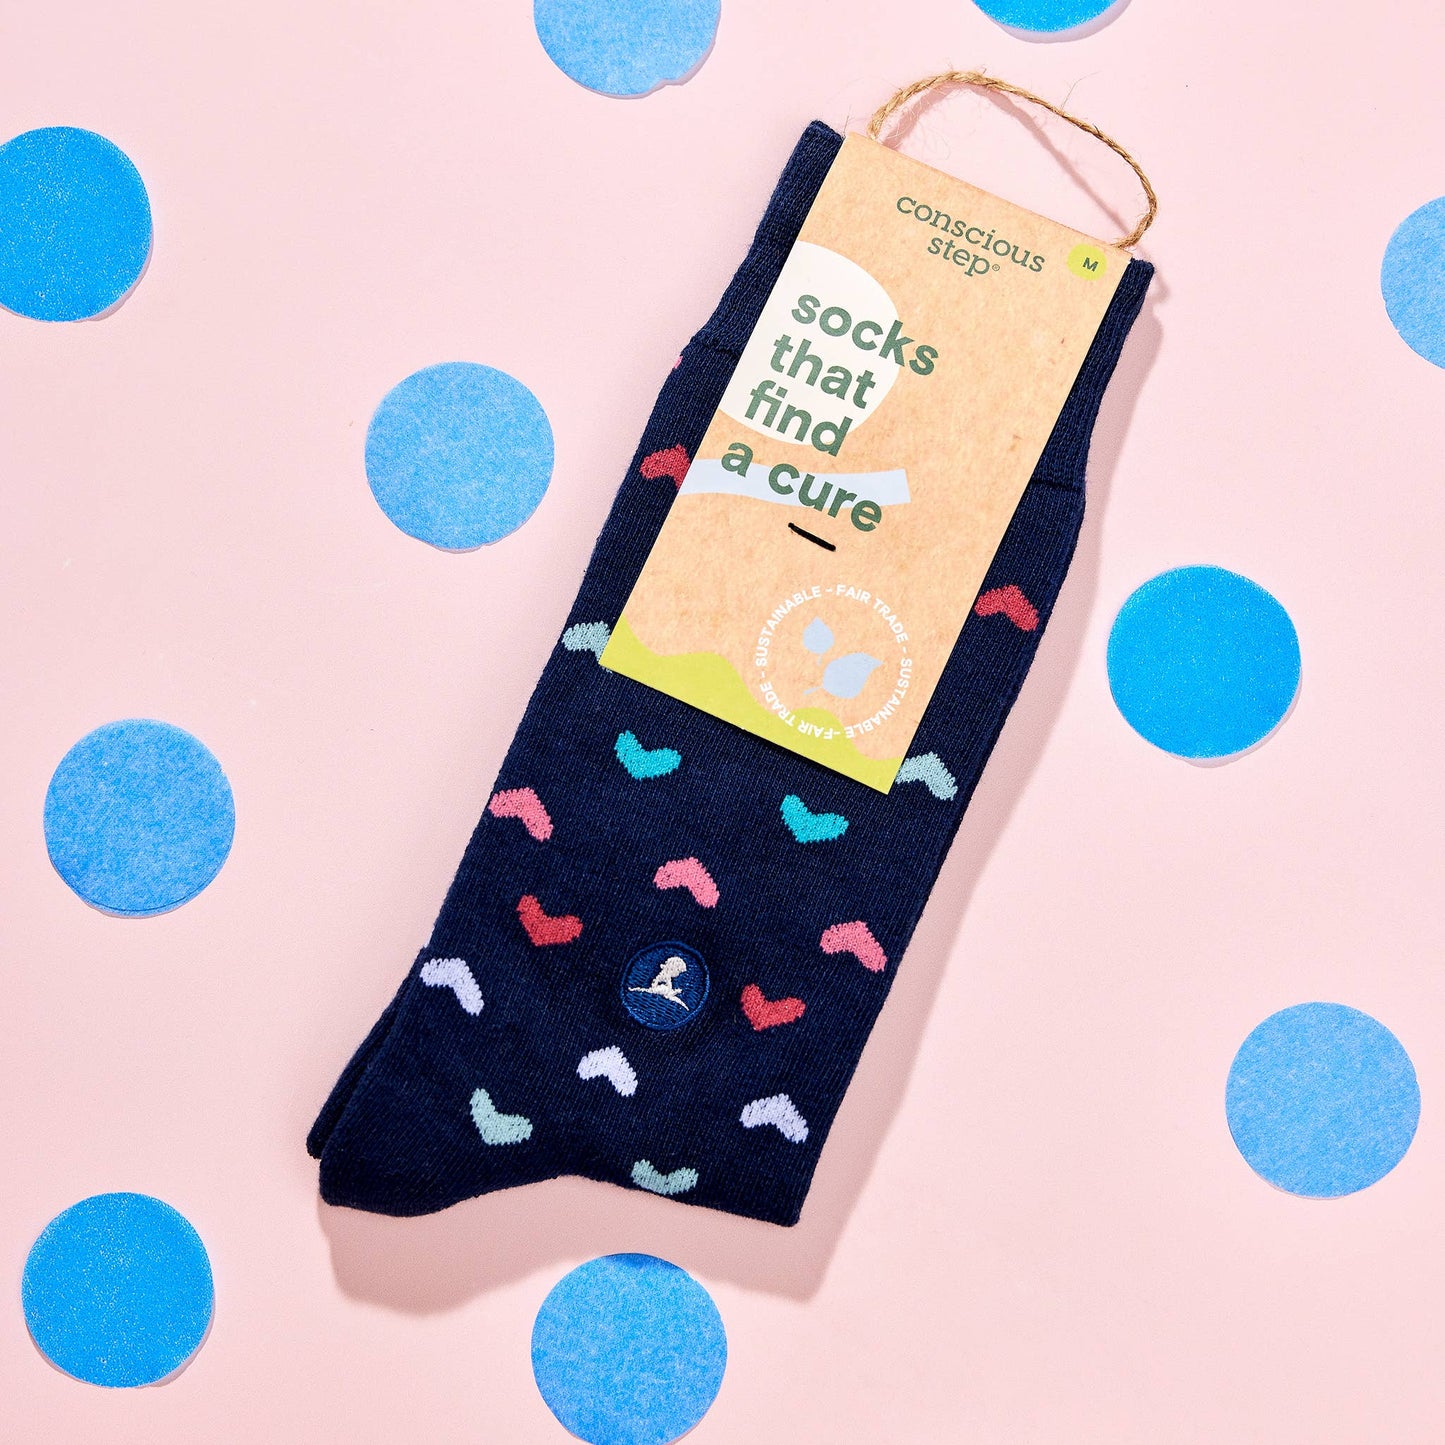 Conscious Step - Socks That Find a Cure (Navy Hearts)